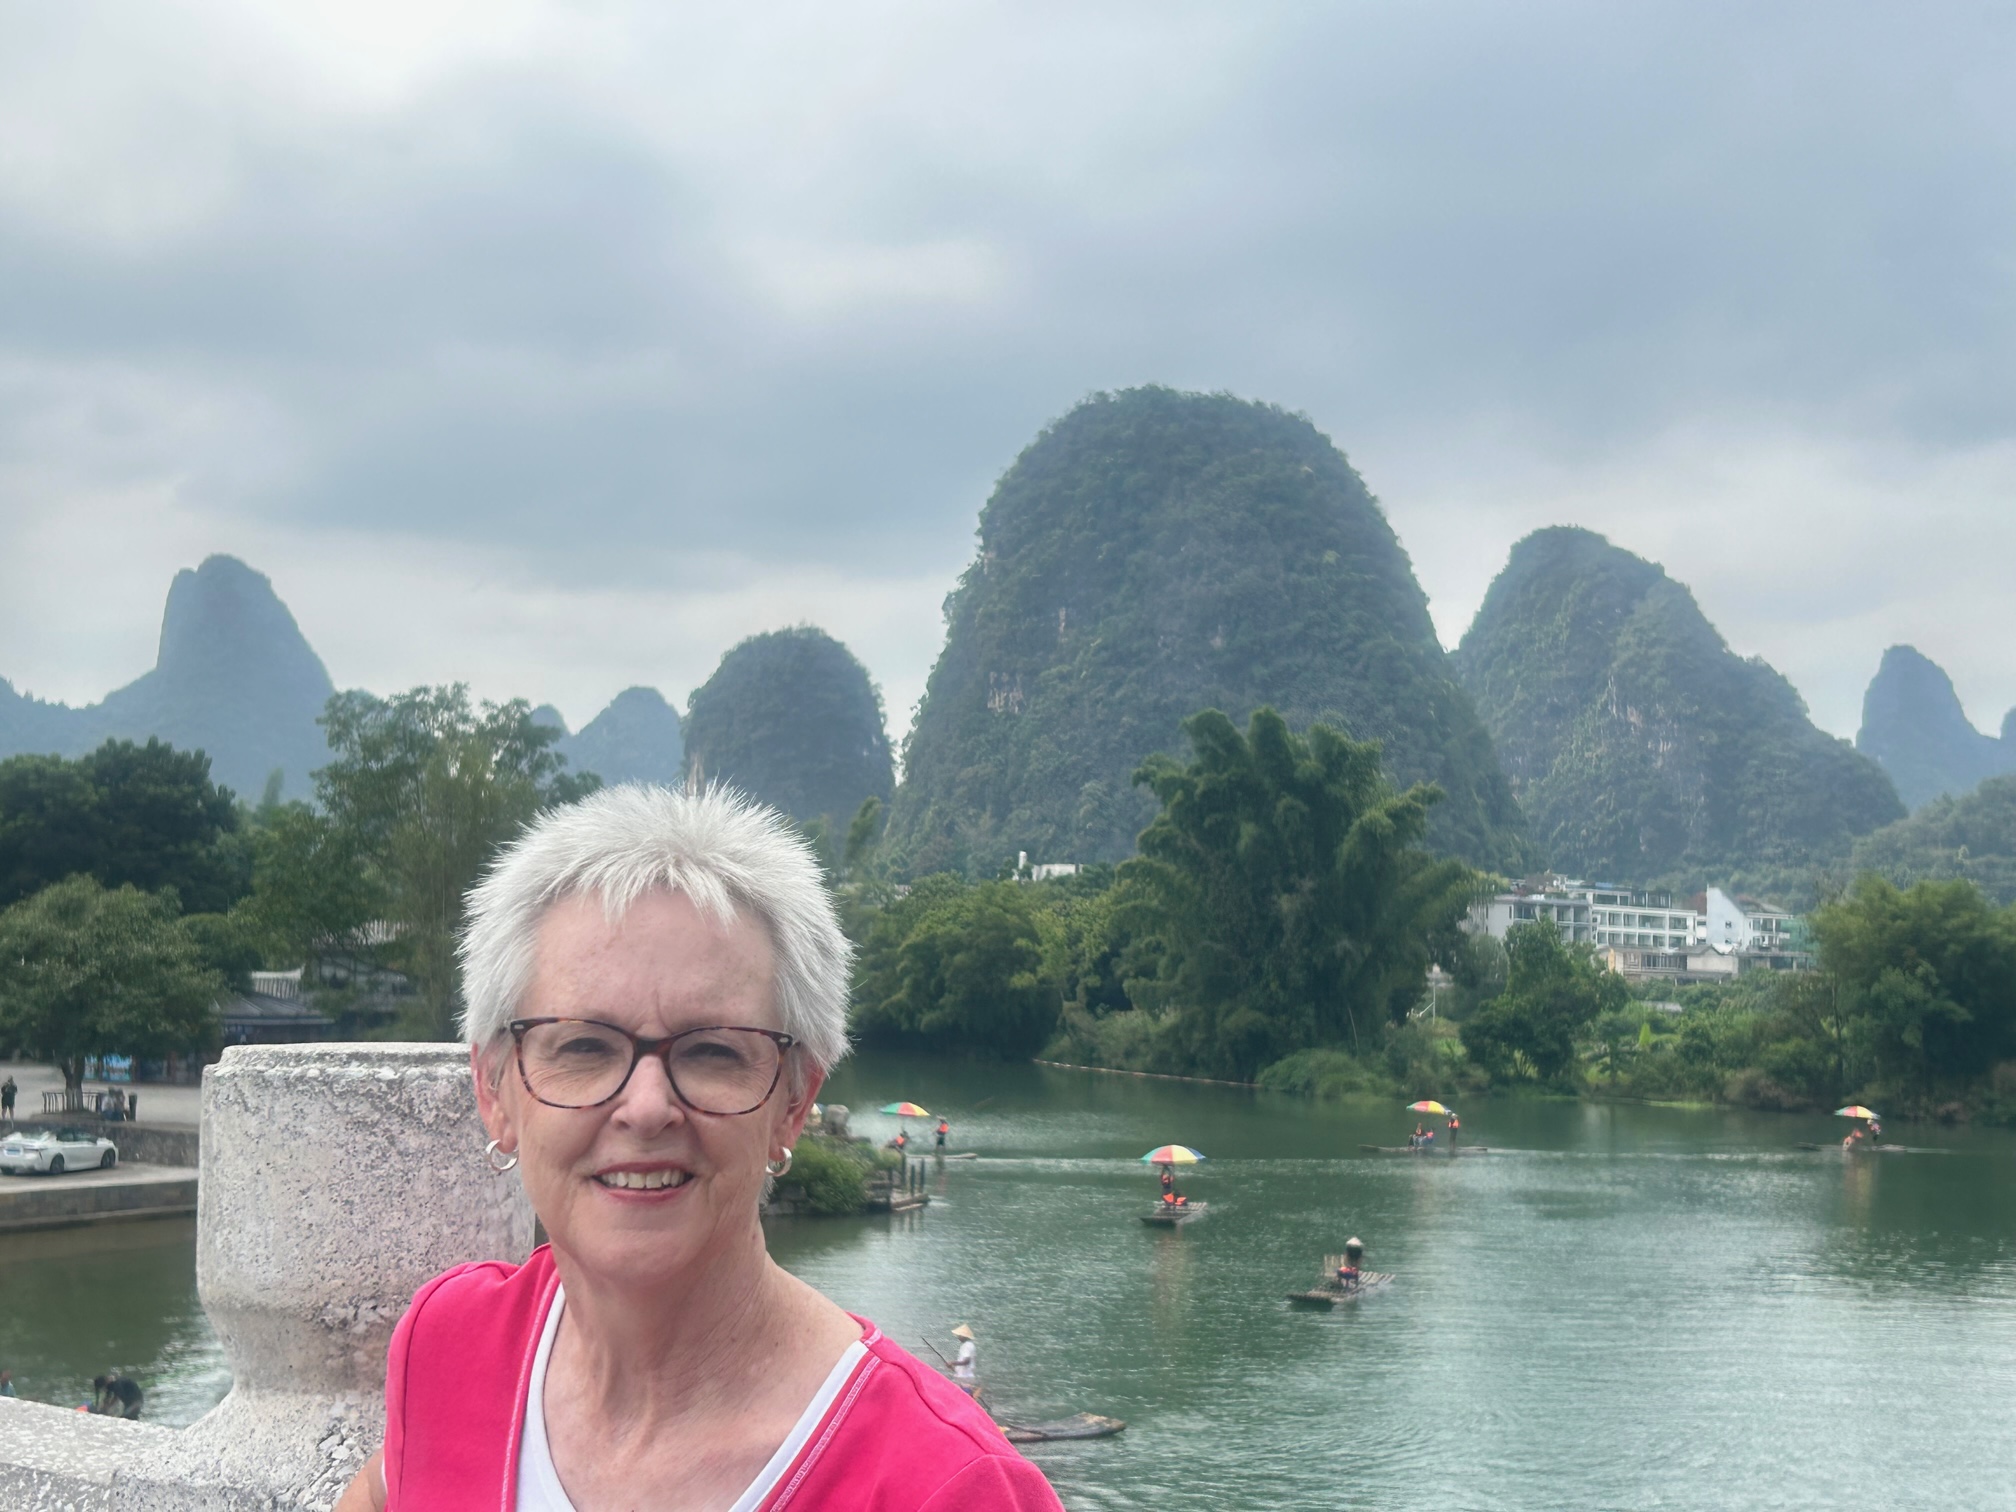 A visit to nearby Yangshuo